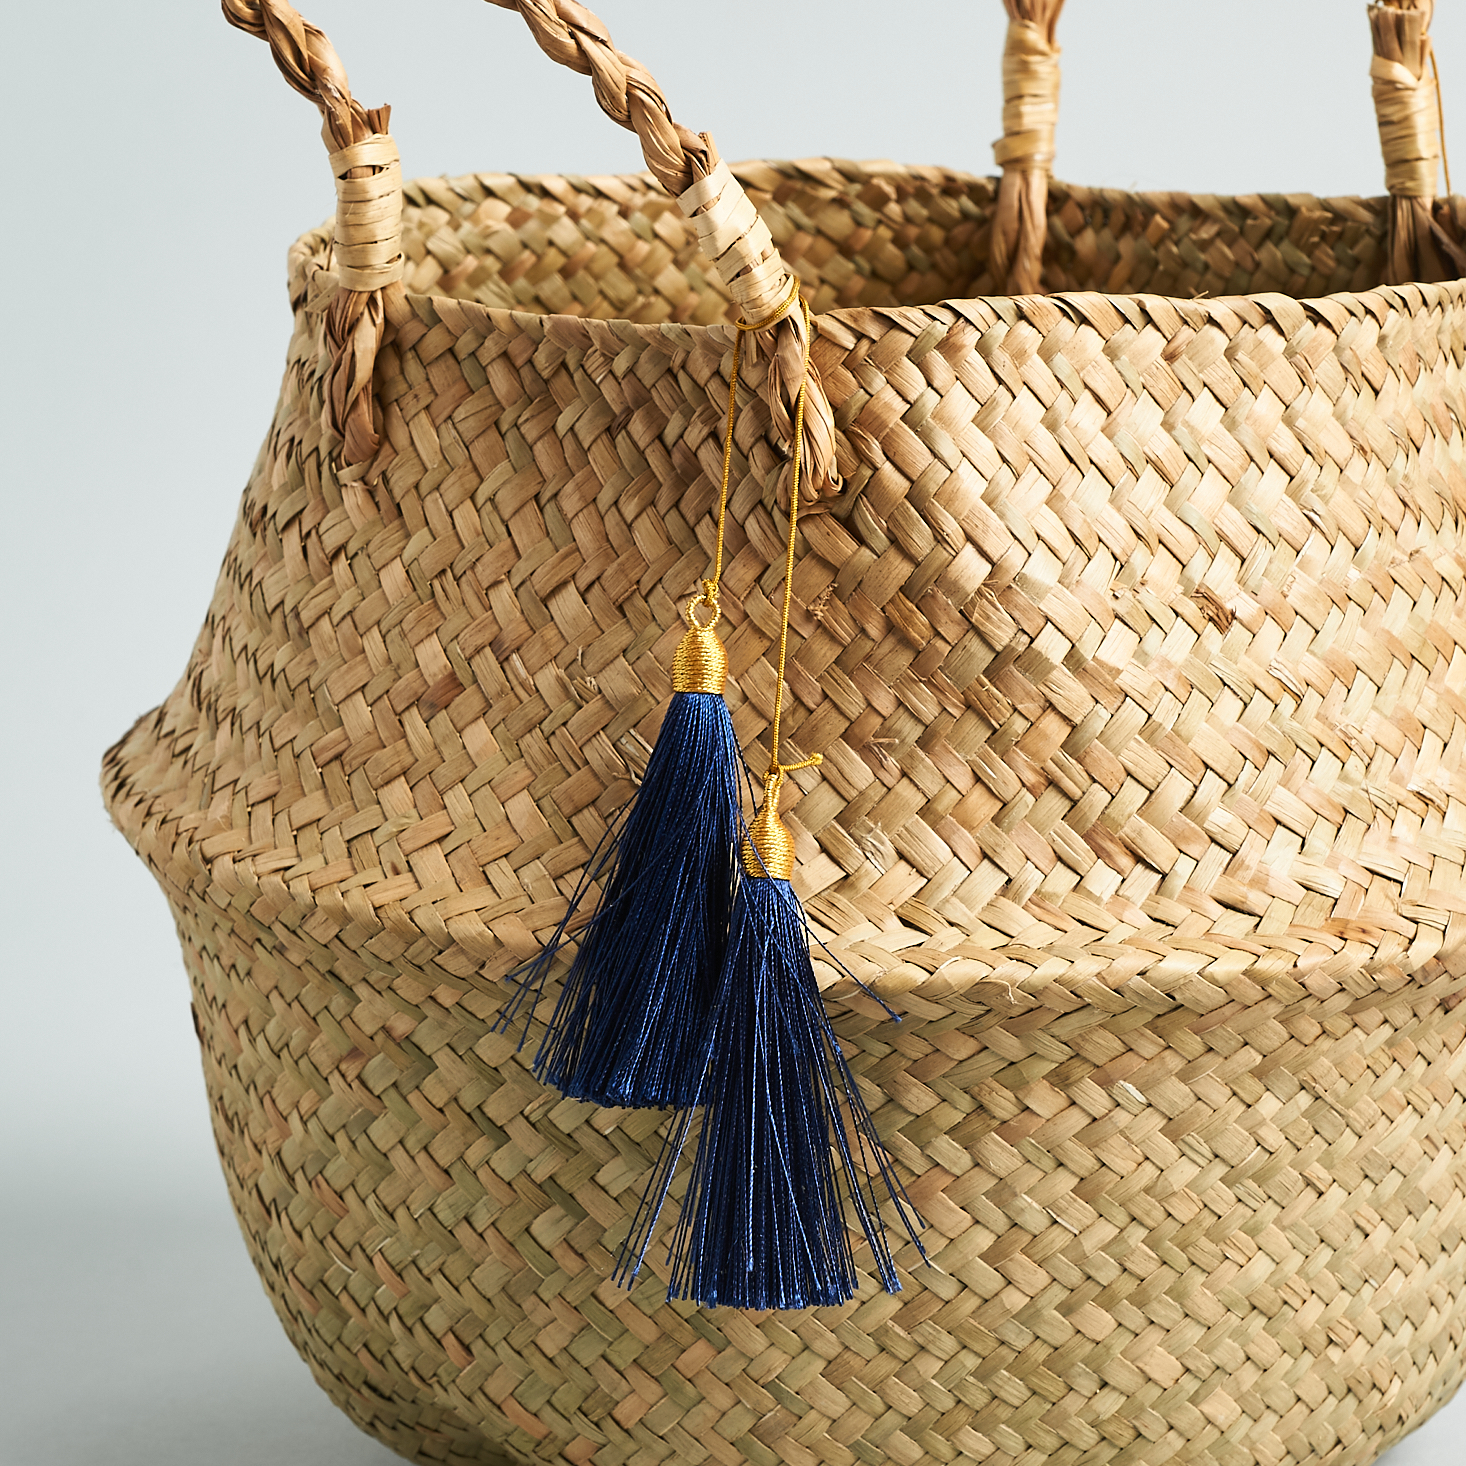 seagrass belly basket from JourneeBox Spring 2021